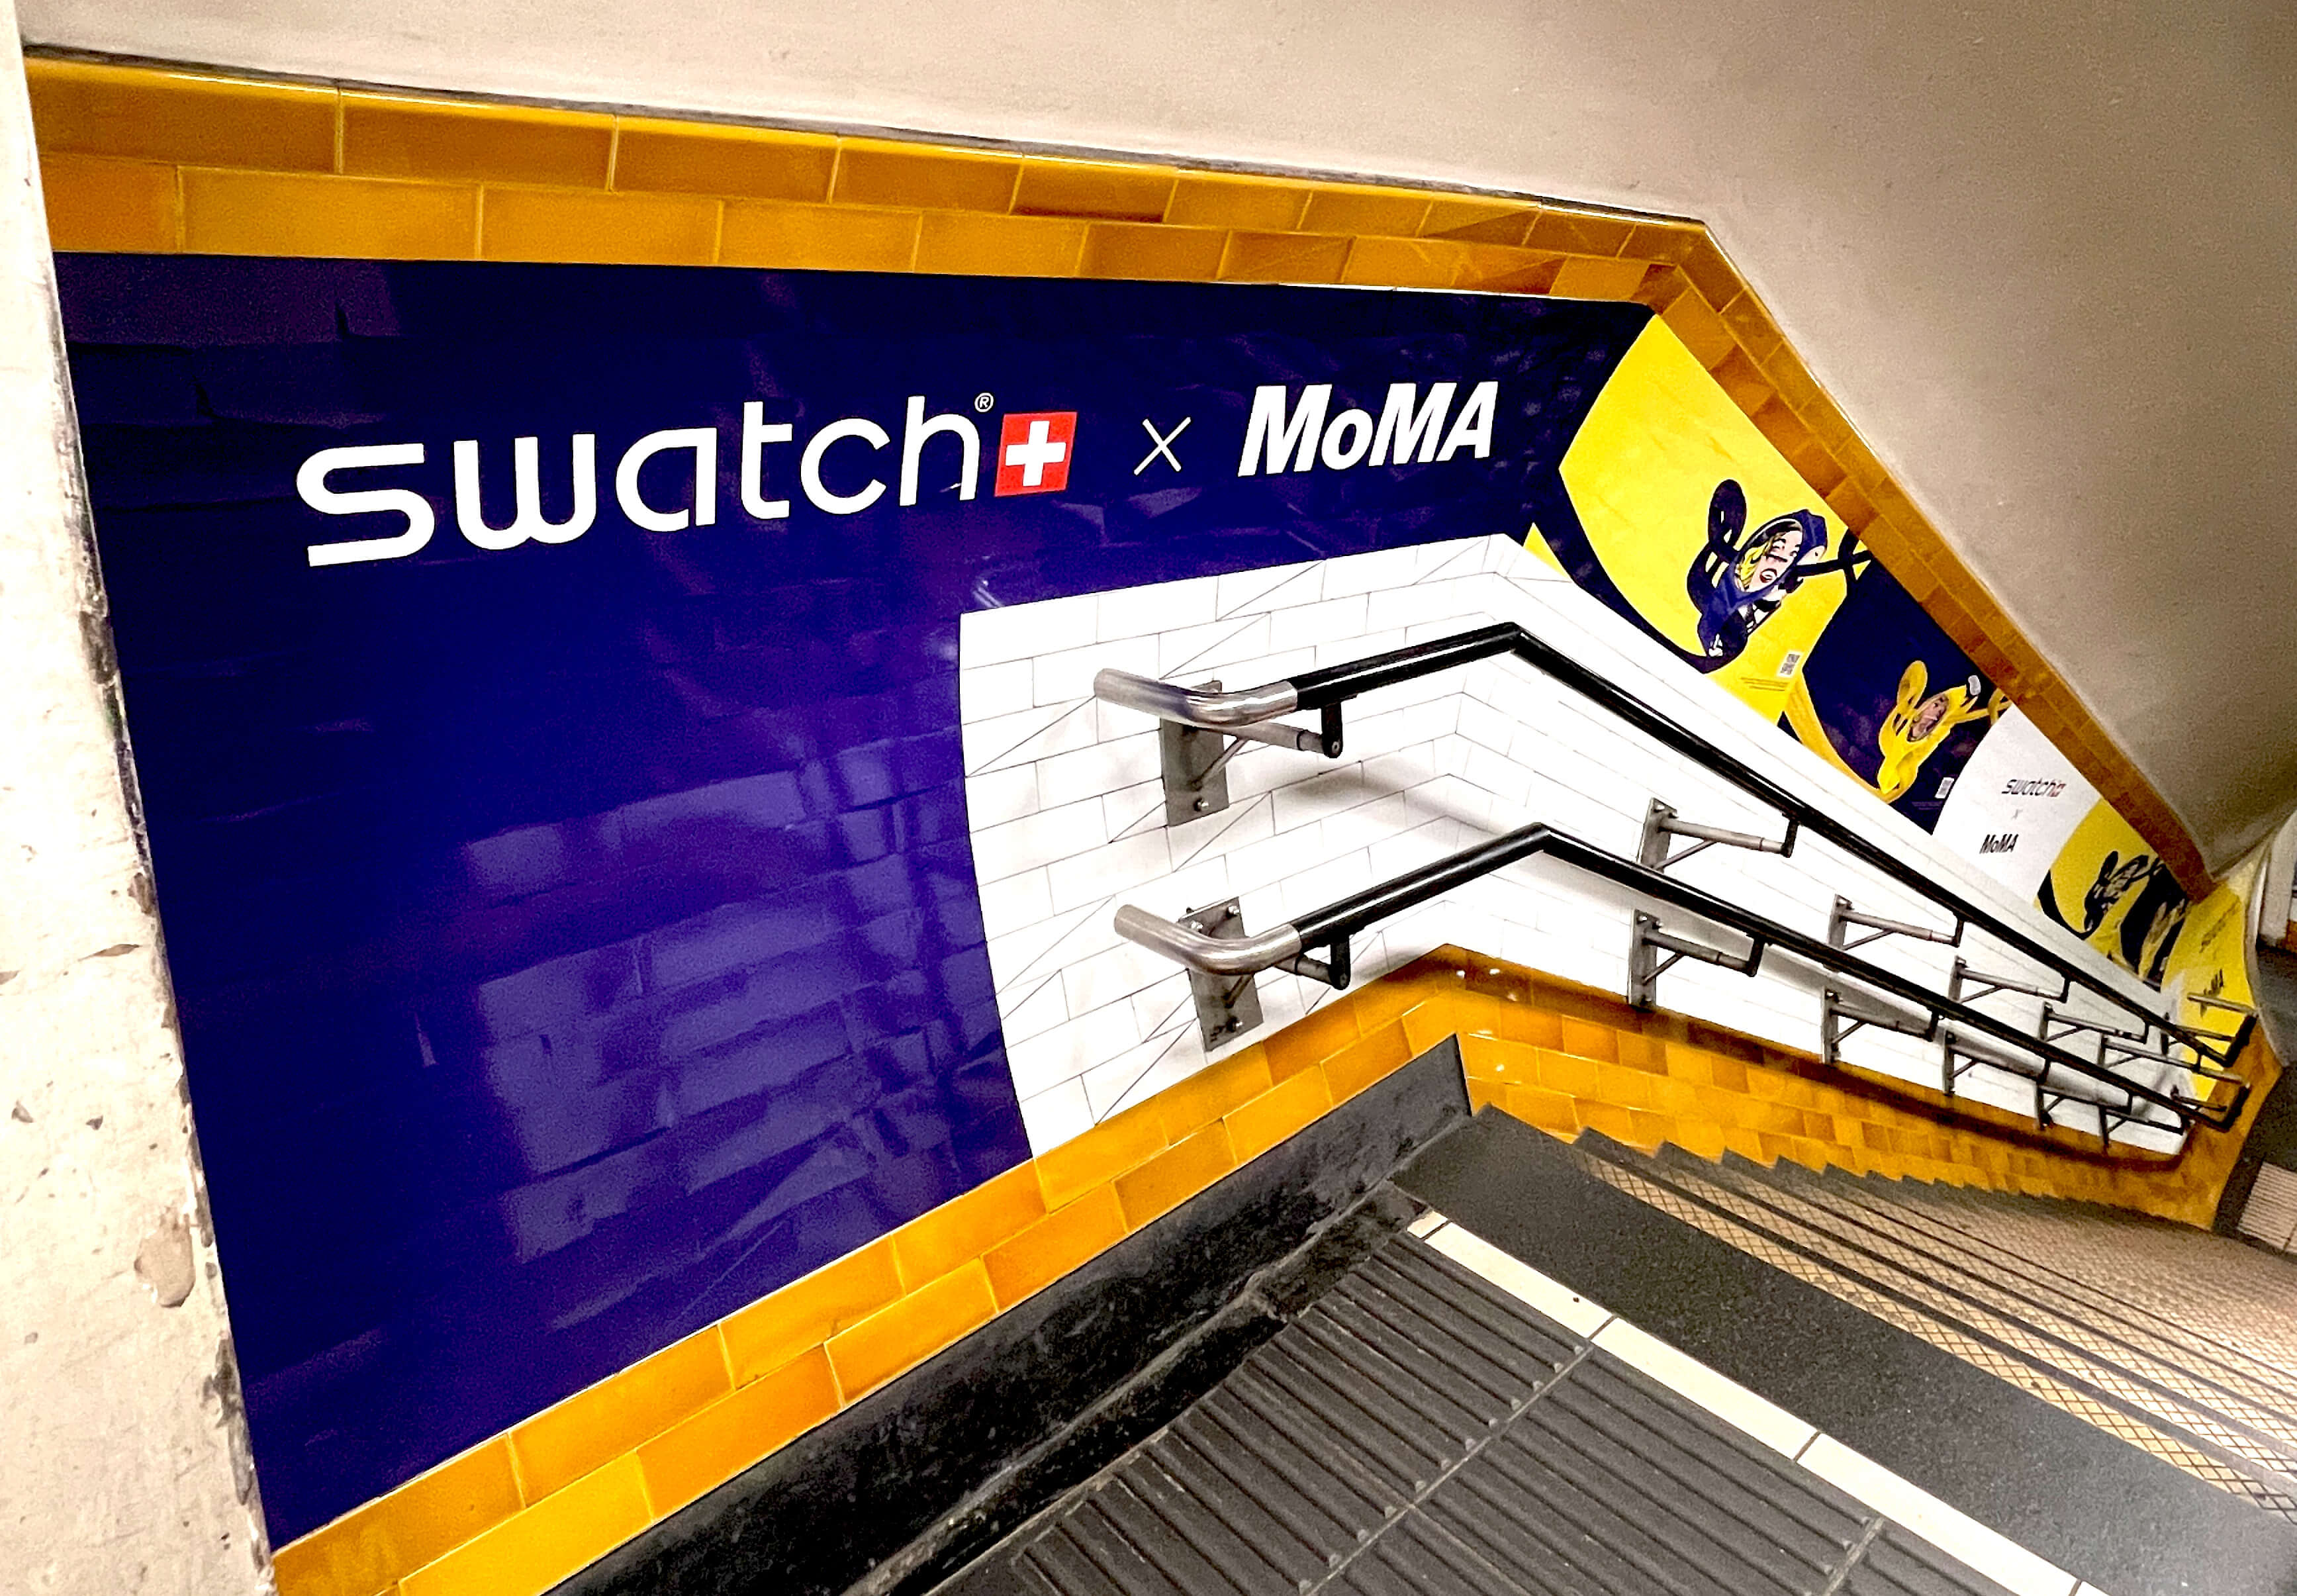 Swatch x MoMA advert campaign takeover at Covent Garden Underground Station